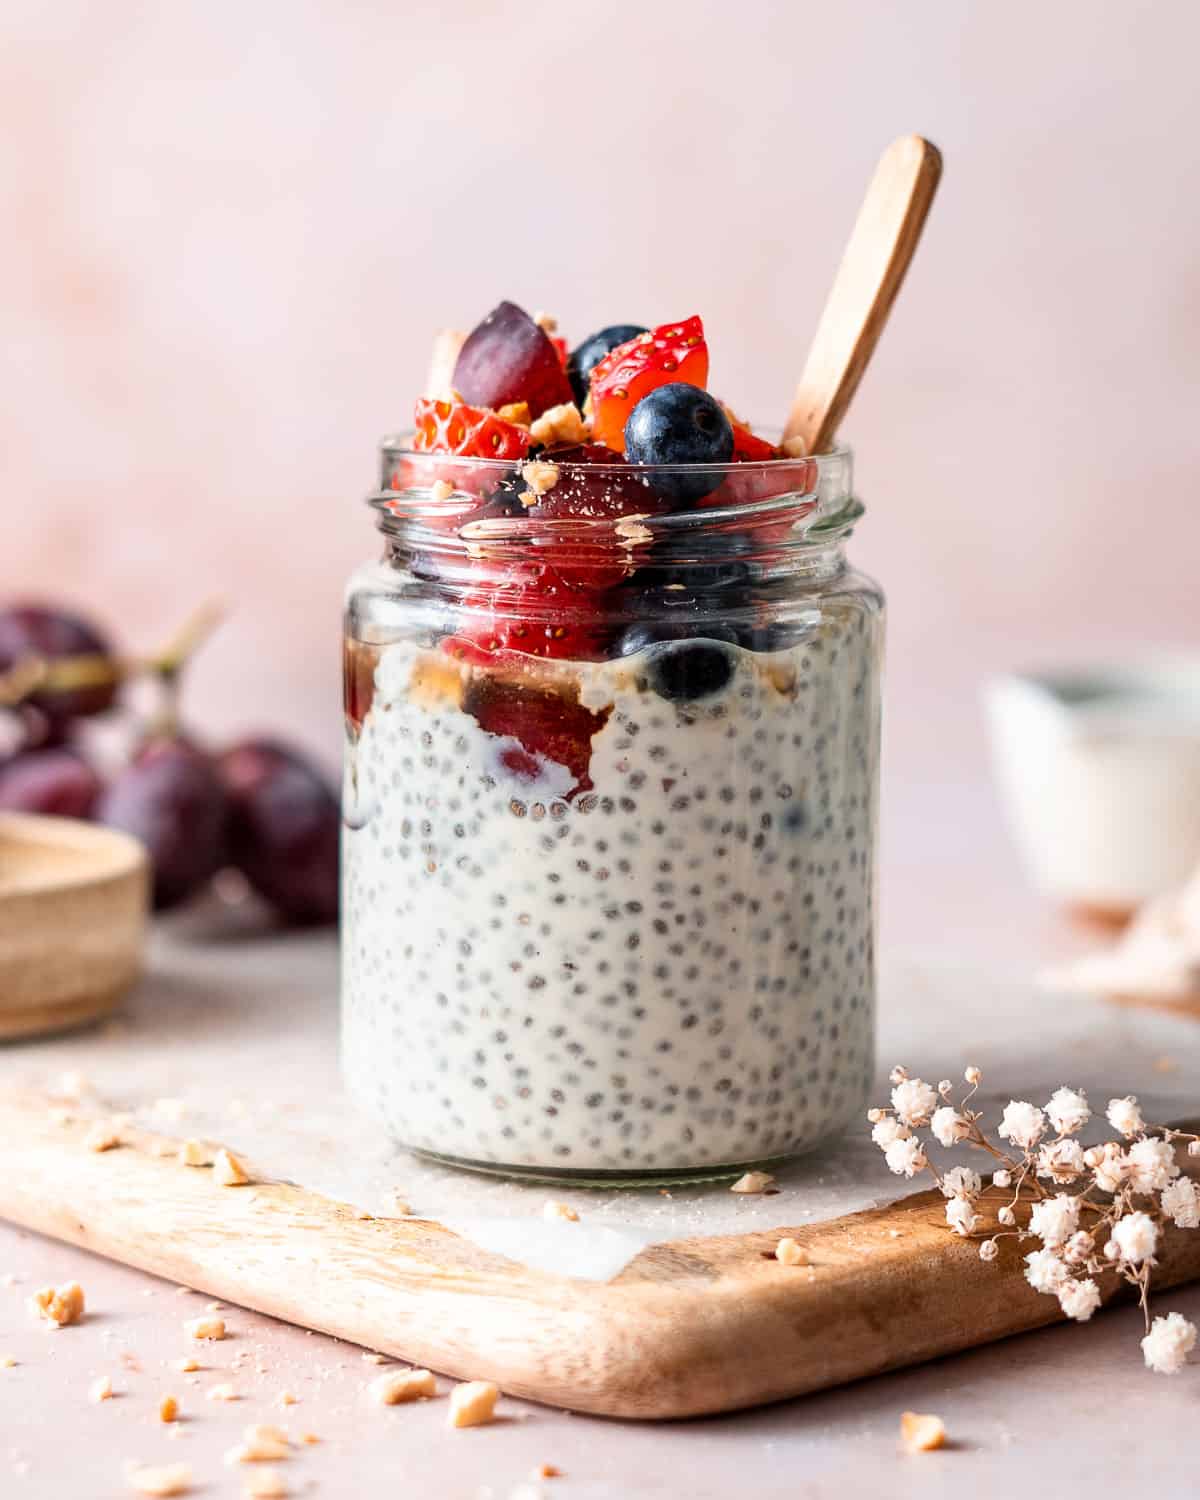 yogurt chia pudding in a glass jar and a spoon in it.